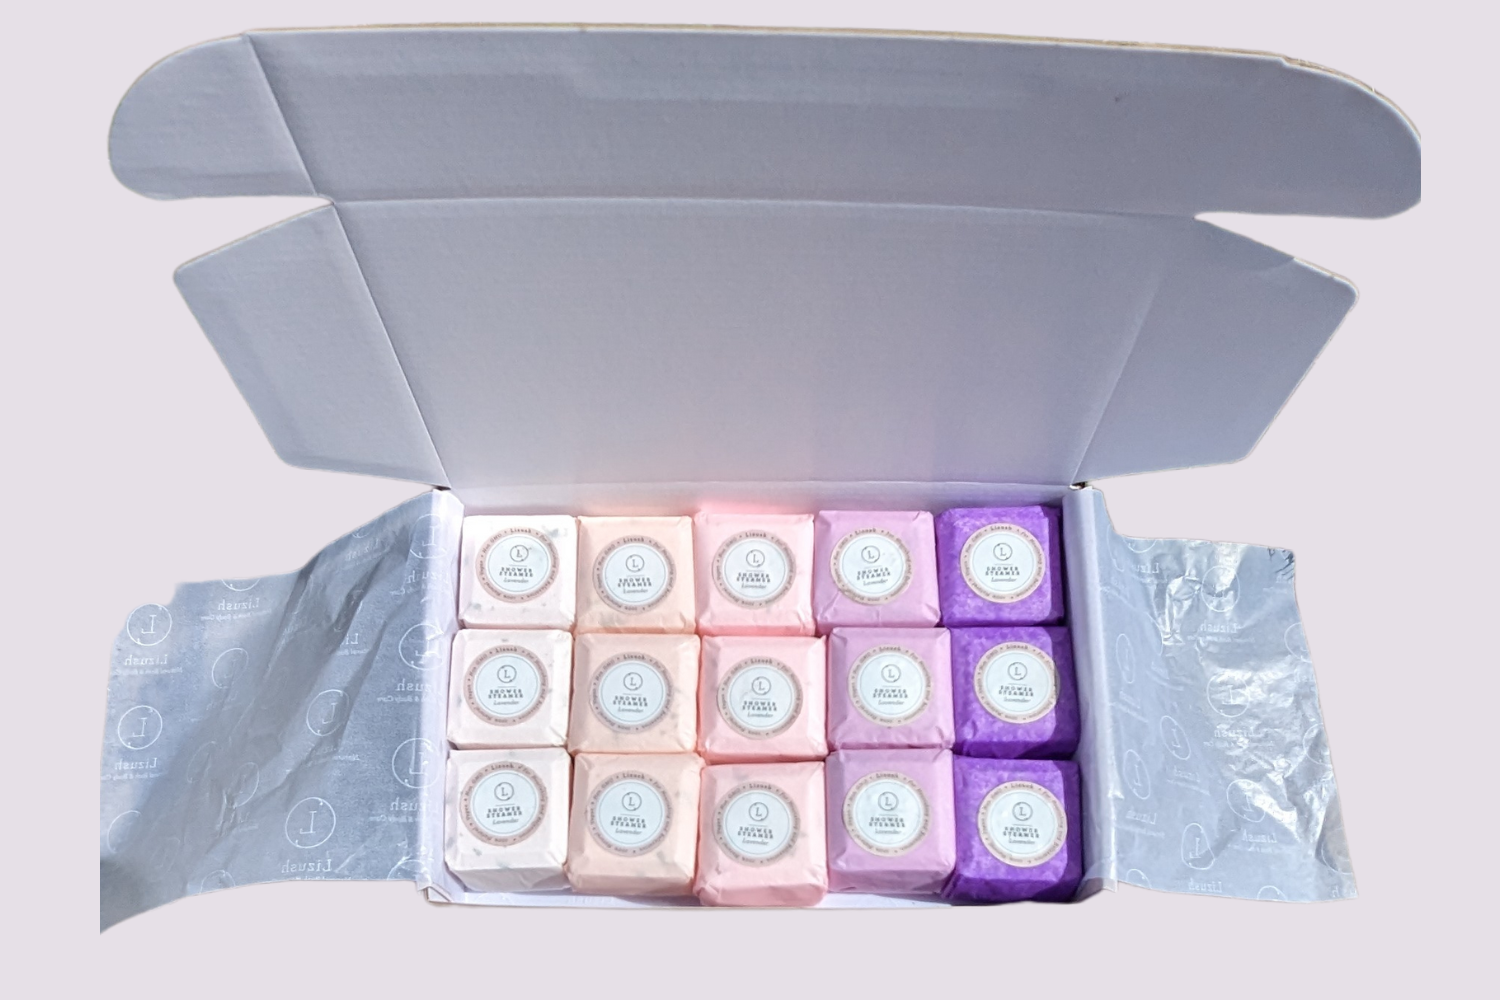 Special - Lavender Shower Steamers, Gift Set of big fizzies - Buy 12 get 15!! 3 FREE steamers!